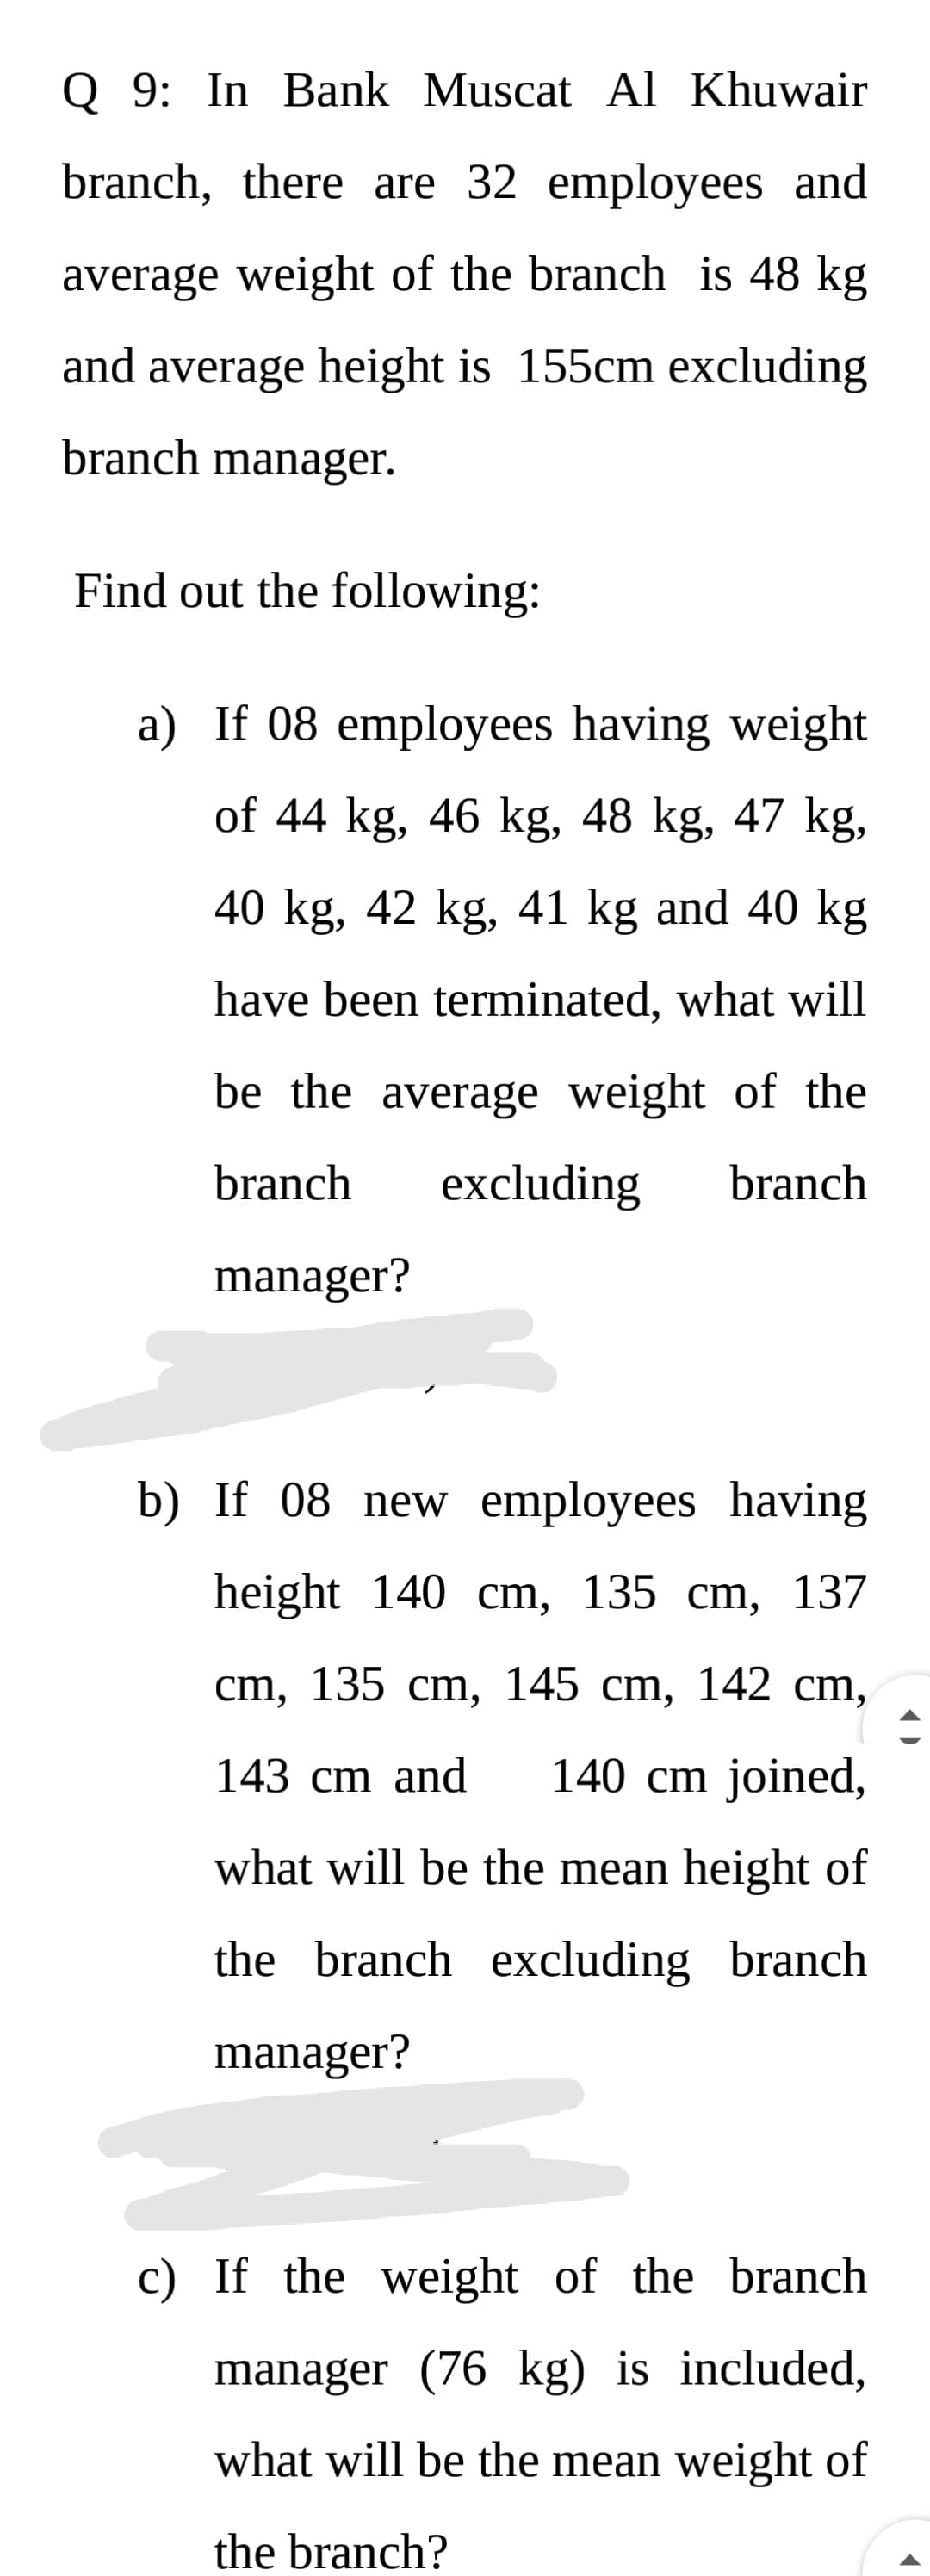 Q 9: In Bank Muscat Al Khuwair
branch, there are 32 employees and
average weight of the branch is 48 kg
and average height is 155cm excluding
branch manager.
Find out the following:
a) If 08 employees having weight
of 44 kg, 46 kg, 48 kg, 47 kg,
40 kg, 42 kg, 41 kg and 40 kg
have been terminated, what will
be the average weight of the
branch
excluding
branch
manager?
b) If 08 new employees having
height 140 cm, 135 cm, 137
cm, 135 cm, 145 cm, 142 cm,
143 cm and
140 cm joined,
what will be the mean height of
the branch excluding branch
manager?
c) If the weight of the branch
manager (76 kg) is included,
what will be the mean weight of
the branch?
